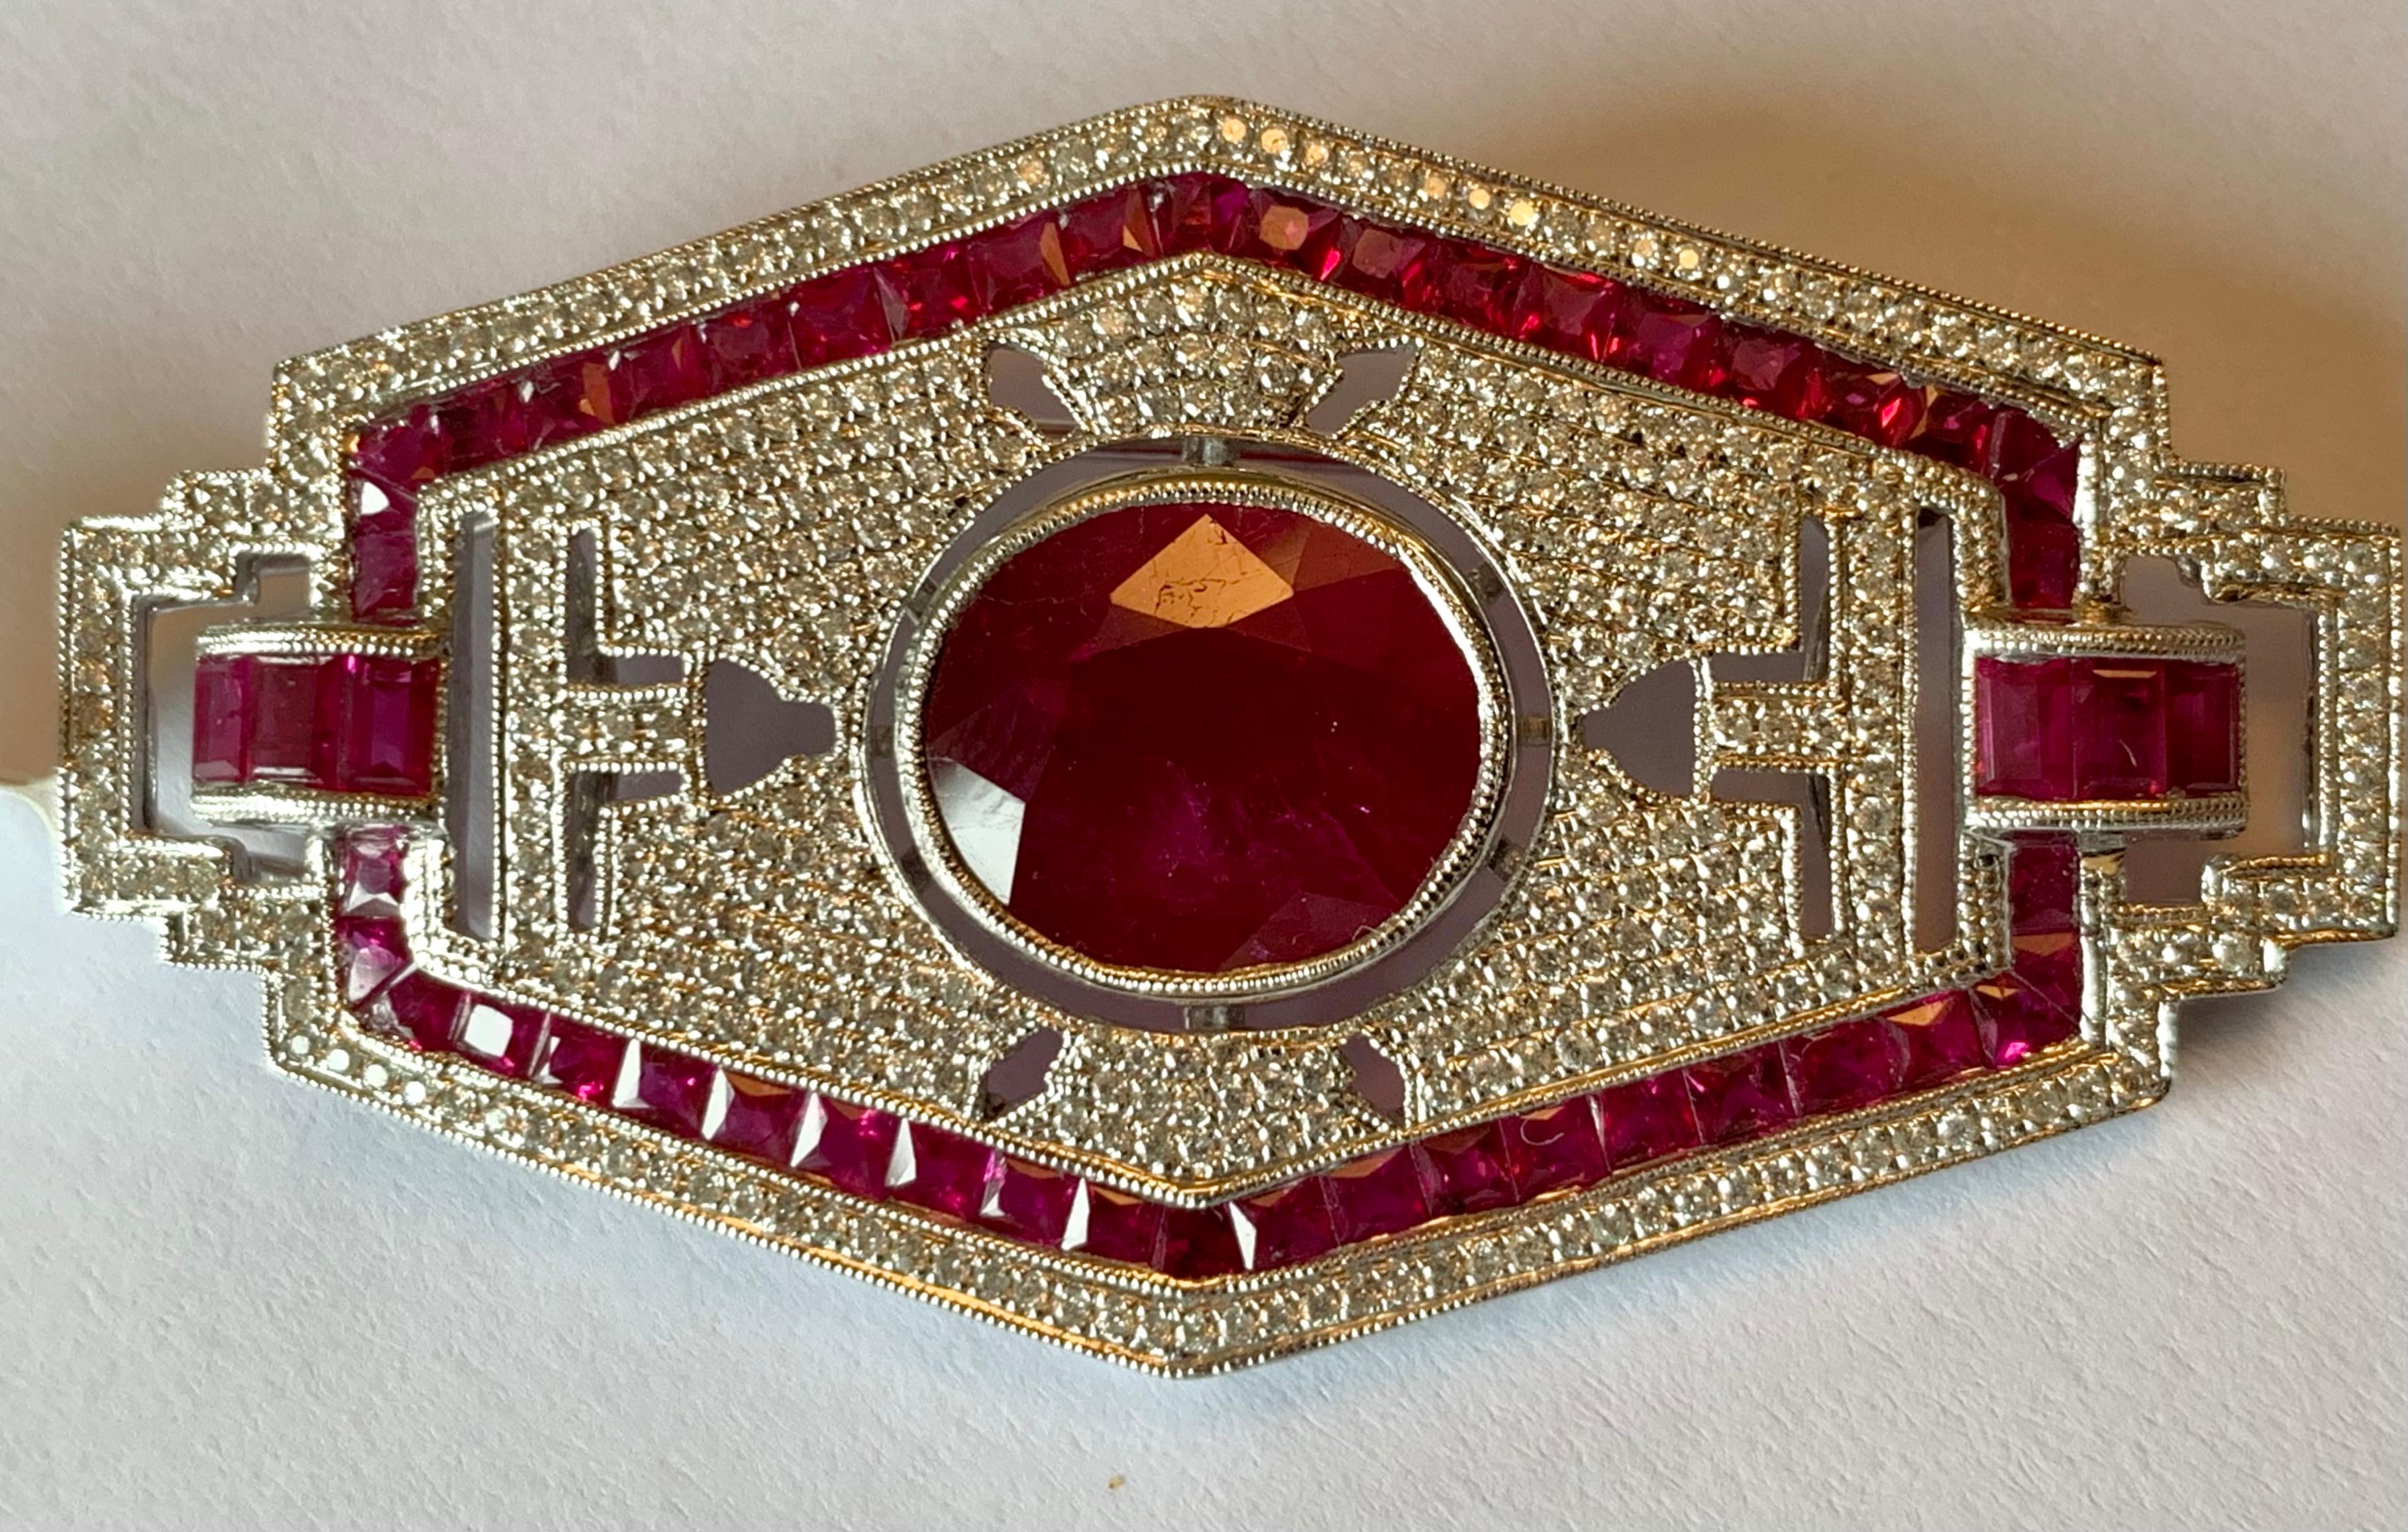 Very attractive new 18 K white Gold brooch/pendant inspired by the glamorous Art Deco era featuring 53 rubies weighing 8.30 ct and 374 brilliant cut Diamonds weighing 1.05 ct. 